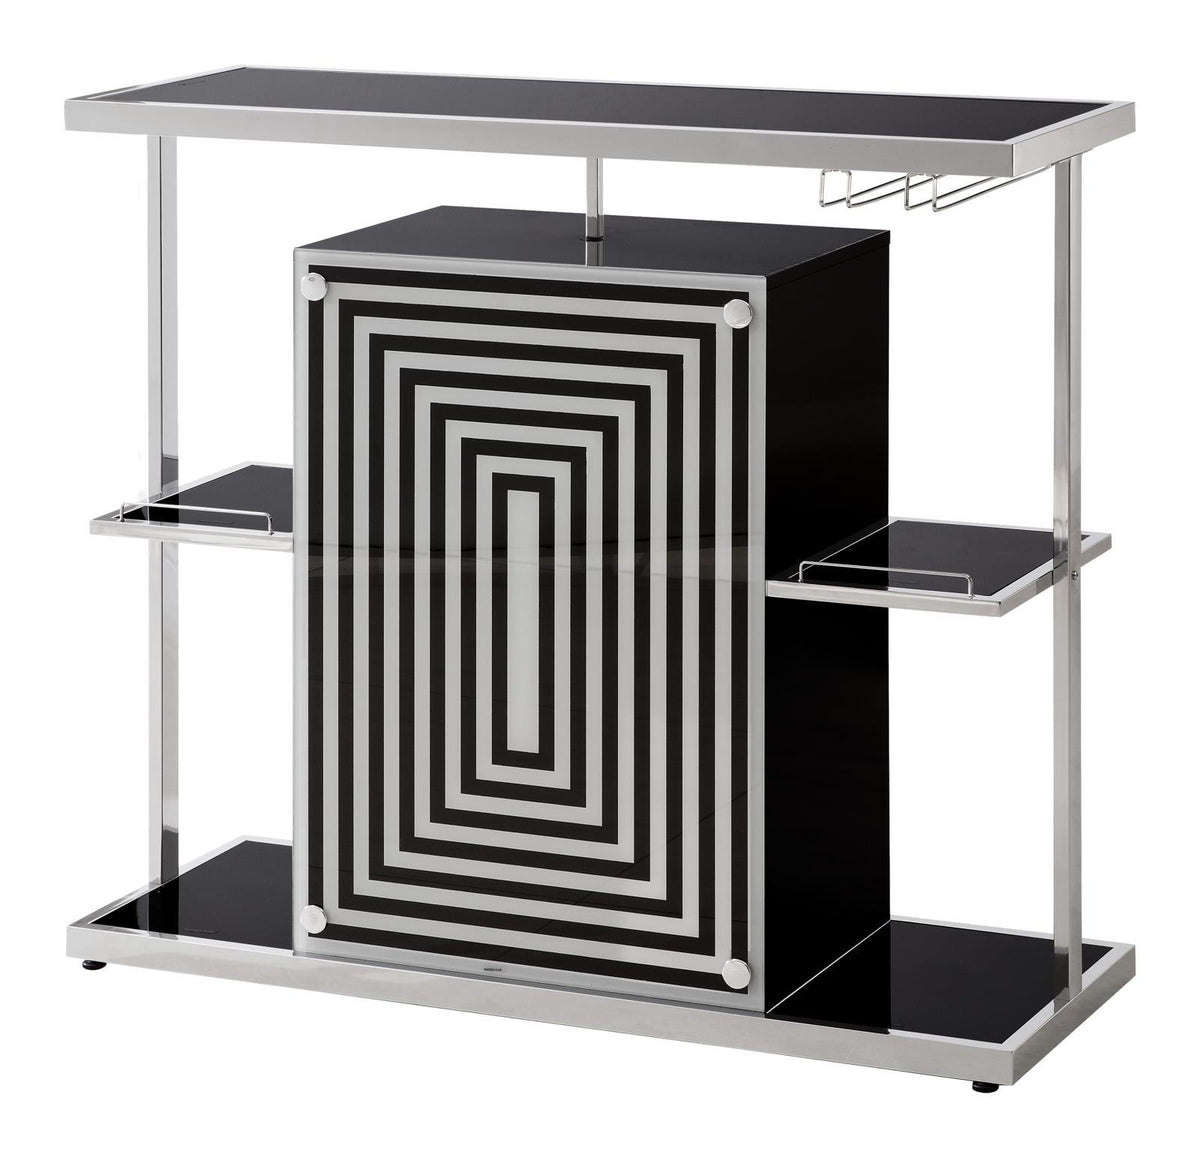 Zinnia 2-tier Bar Unit Glossy Black and White Zinnia 2-tier Bar Unit Glossy Black and White Half Price Furniture